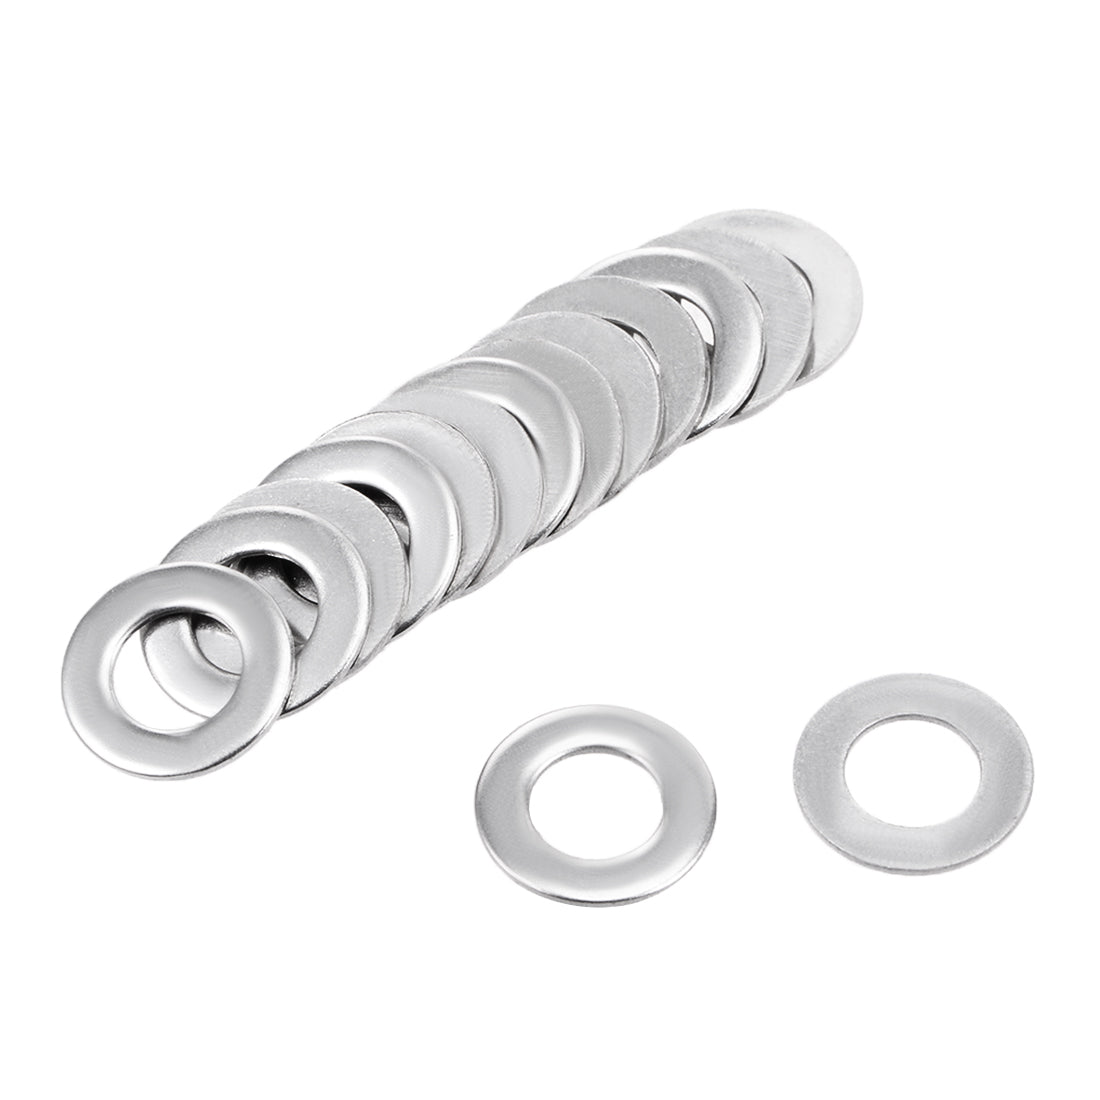 uxcell Uxcell 100 Pcs 6.5mm x 12mm x 0.8mm 304 Stainless Steel Flat Washer for Screw Bolt